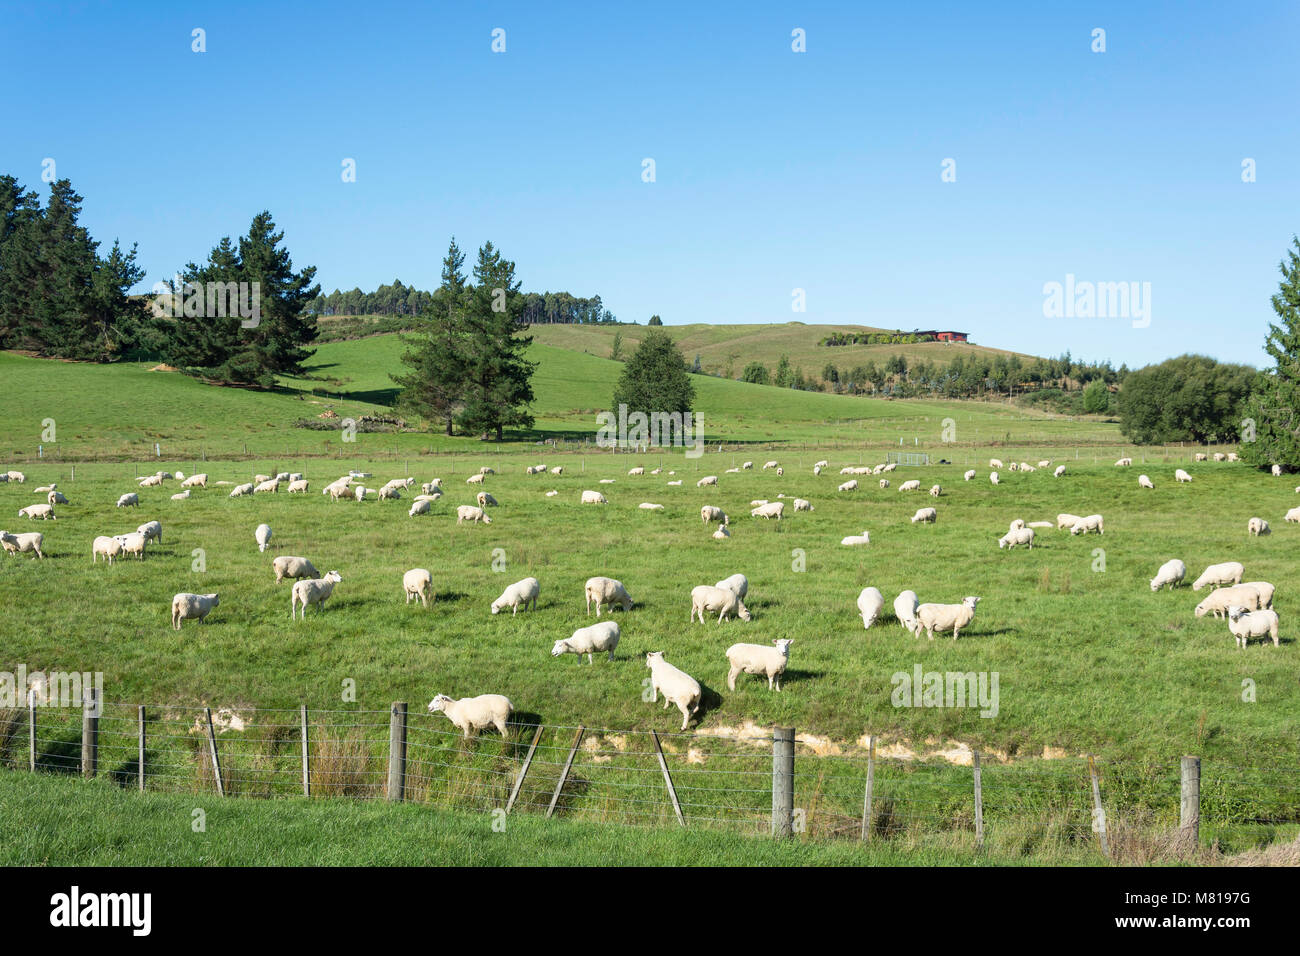 Sheep in field, Lower Moutere, Tasman District, New Zealand Stock Photo